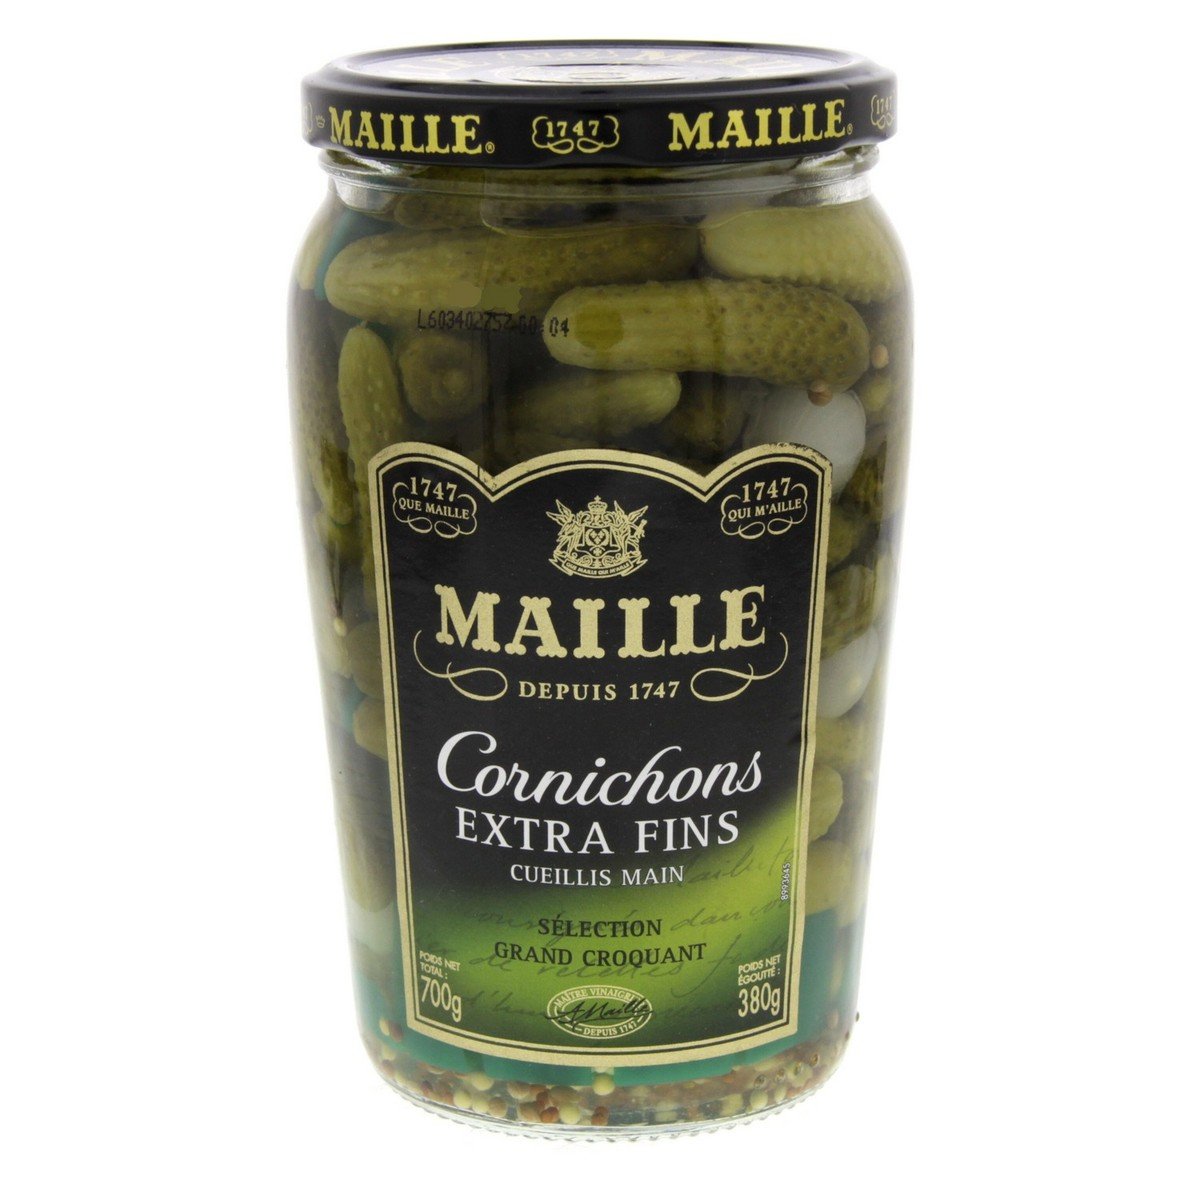 Maille Cornichons Extra Fines Cueillis Main 380 g